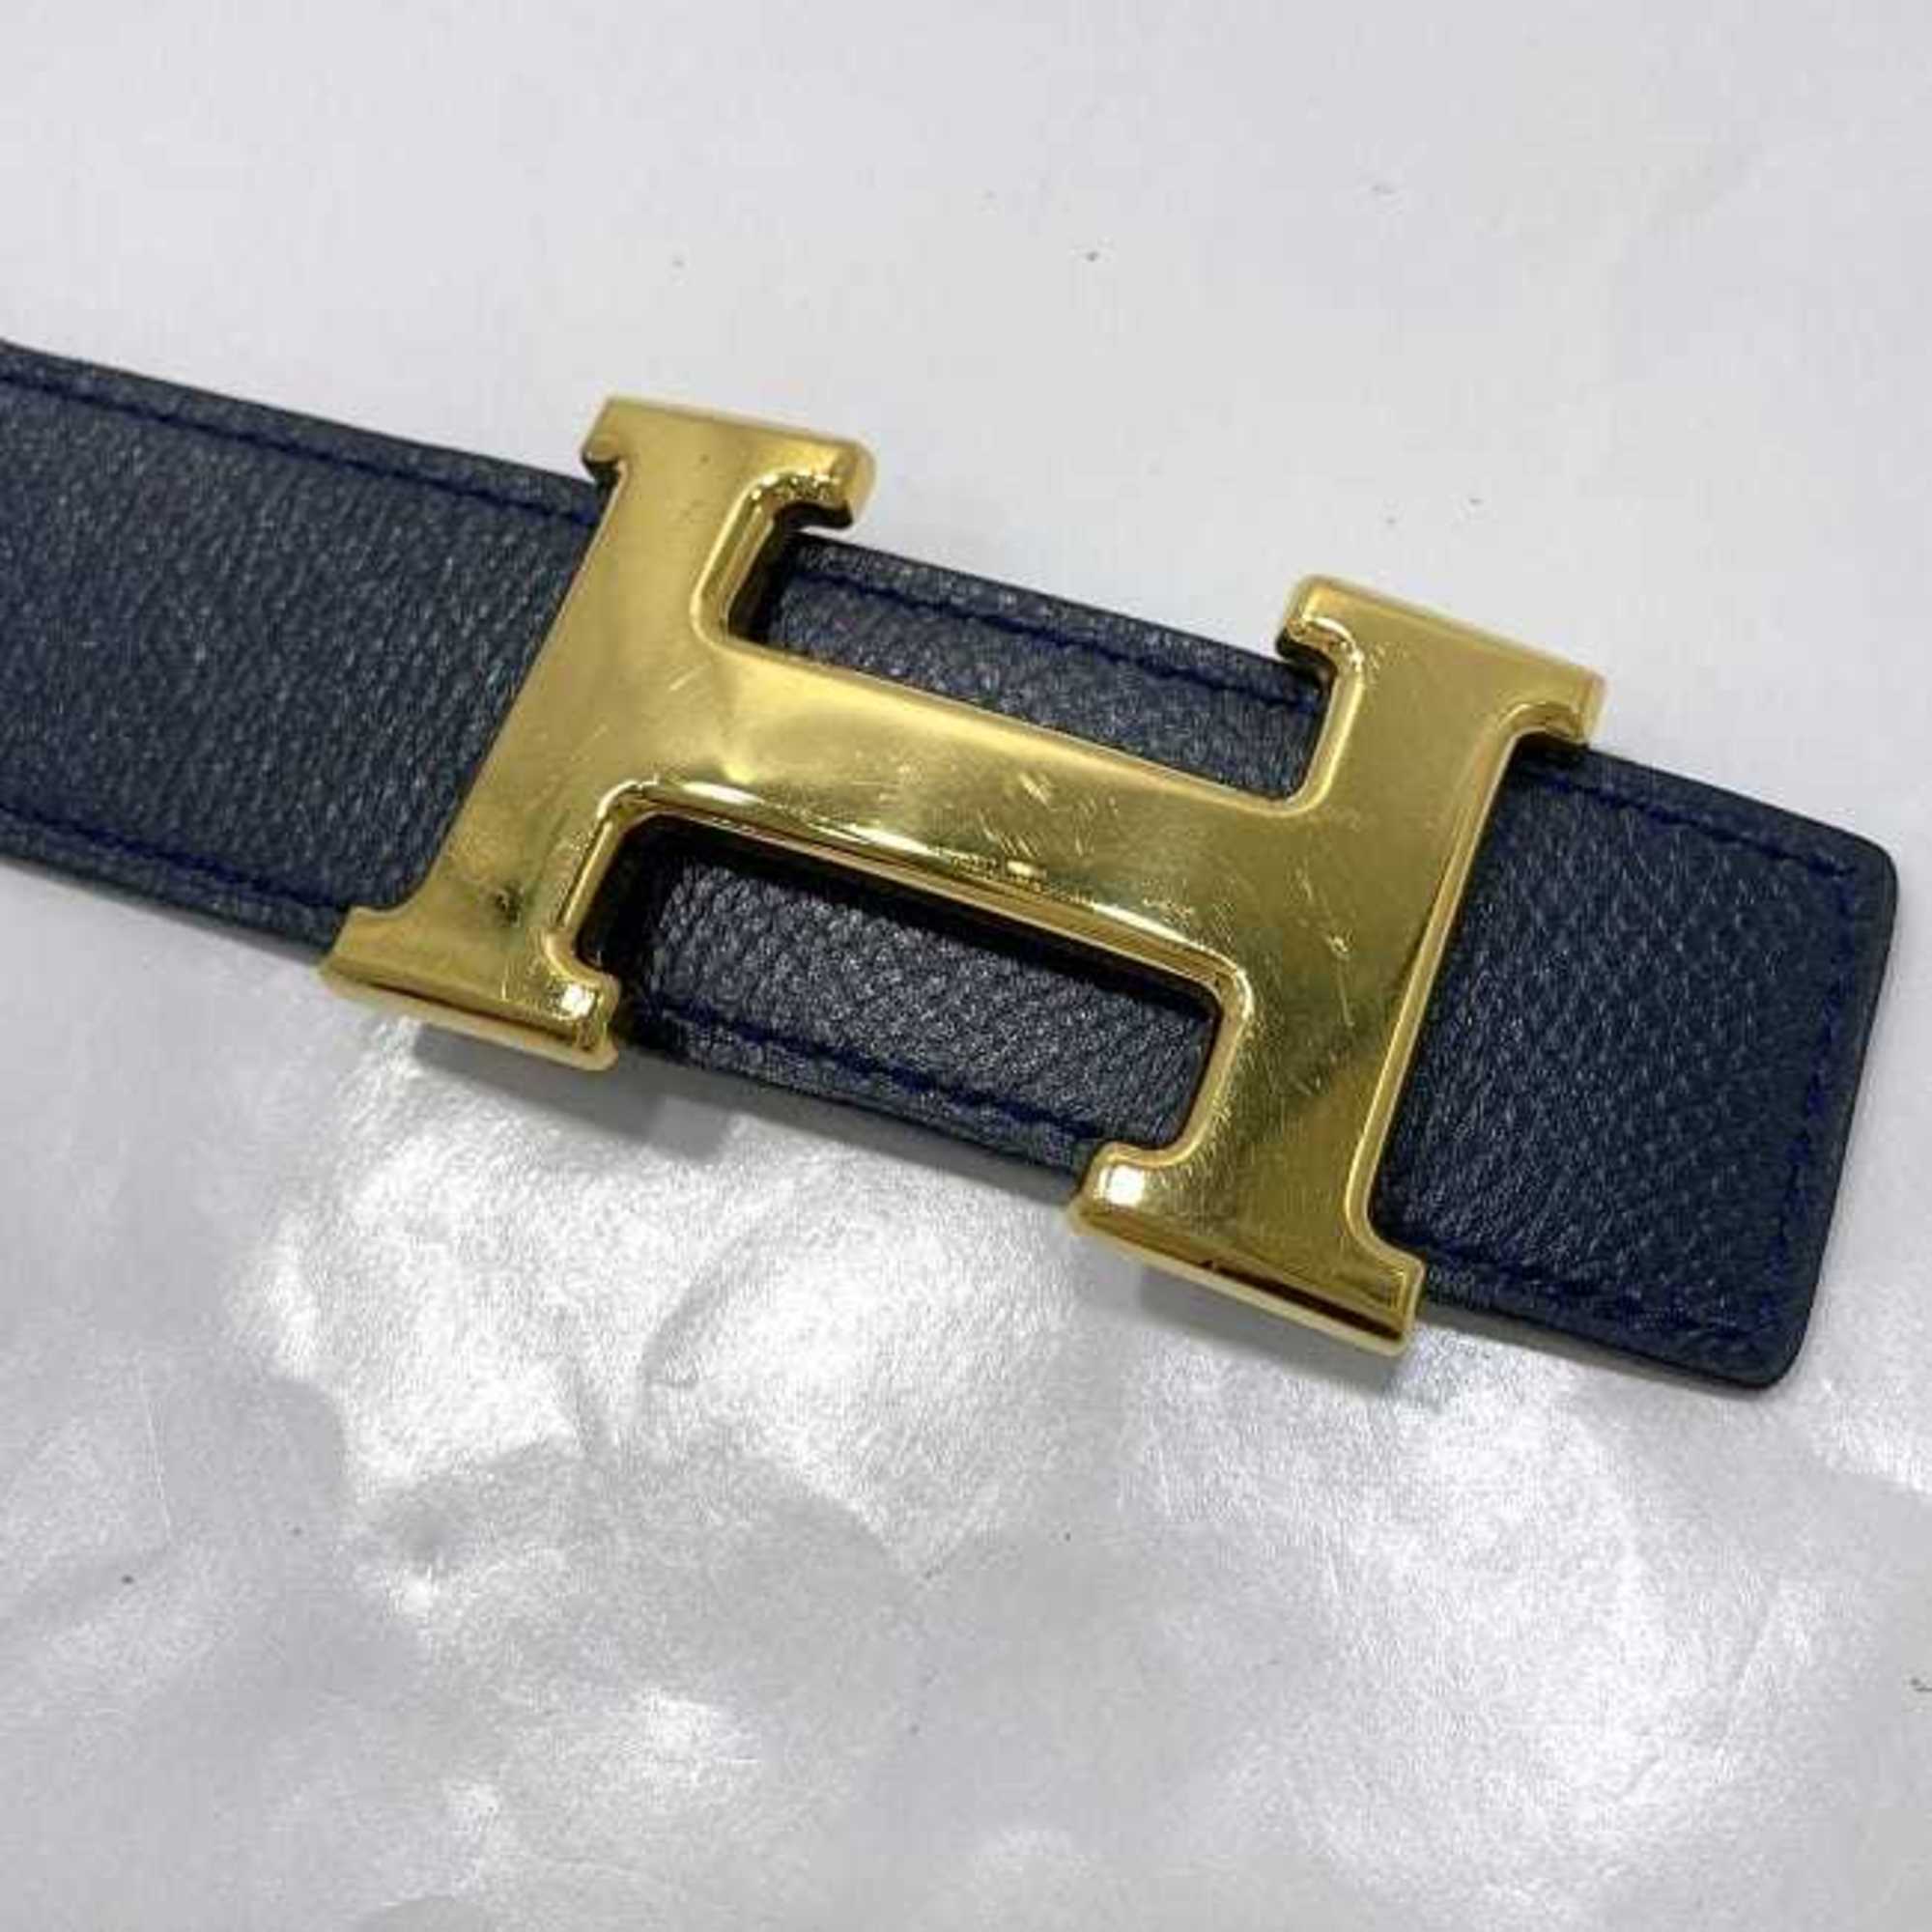 Hermes H Belt Navy Green Gold Constance Buckle Leather Taurillon Clemence Togo GP 〇Y Engraved HERMES Reversible Ladies